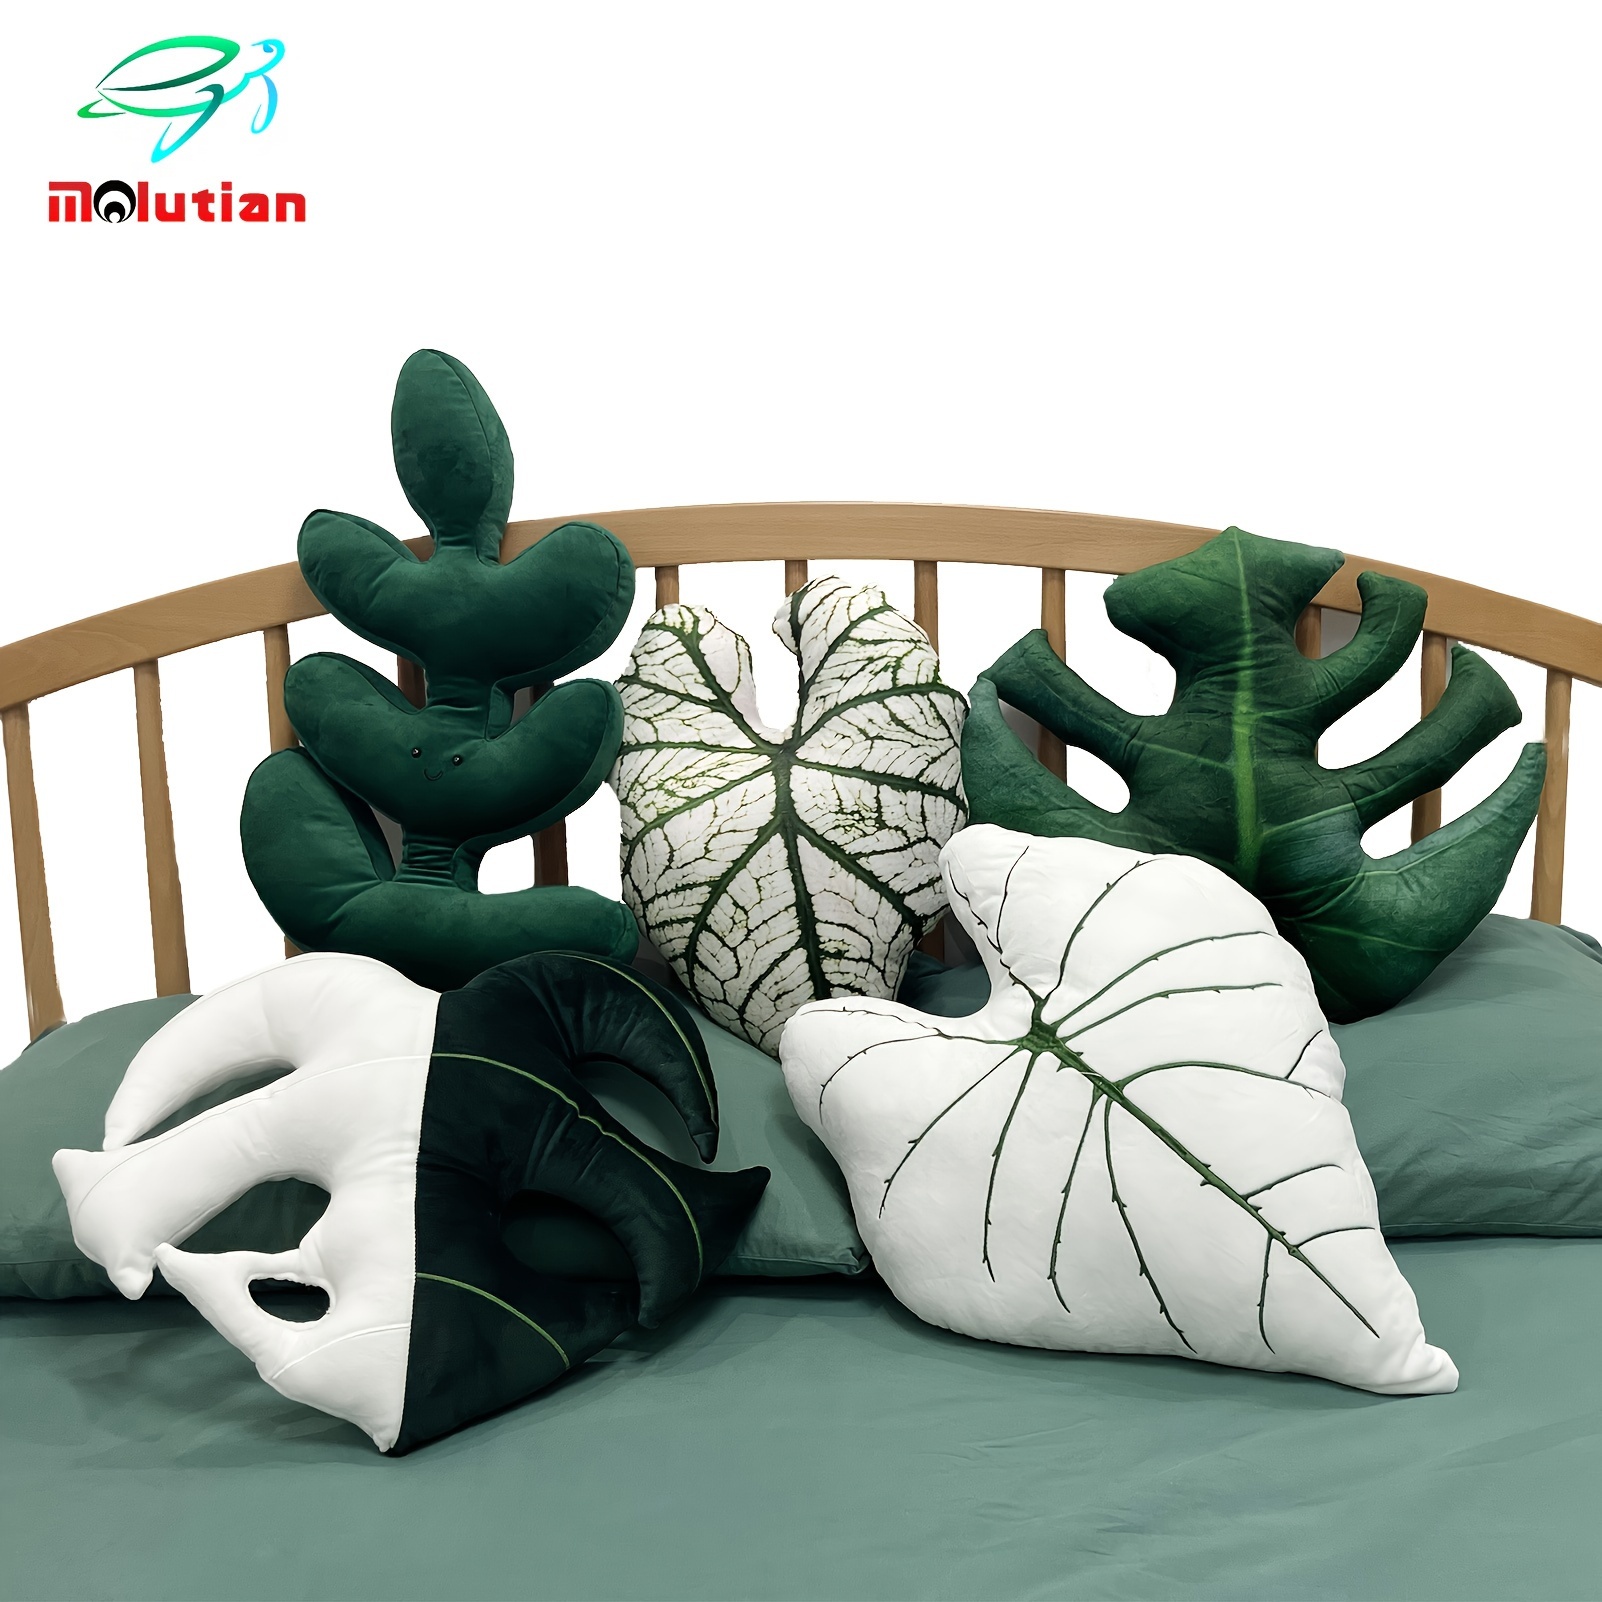 

6 Style Leaf Plush 3d Leaft Pillow 3d Turtle Bone Leaf Deep Forest Throw Pillow Monstera Pillow For Couch Sofa Living Room Home Decor Gift Halloween Decor, Thanksgiving, Christmas Gift